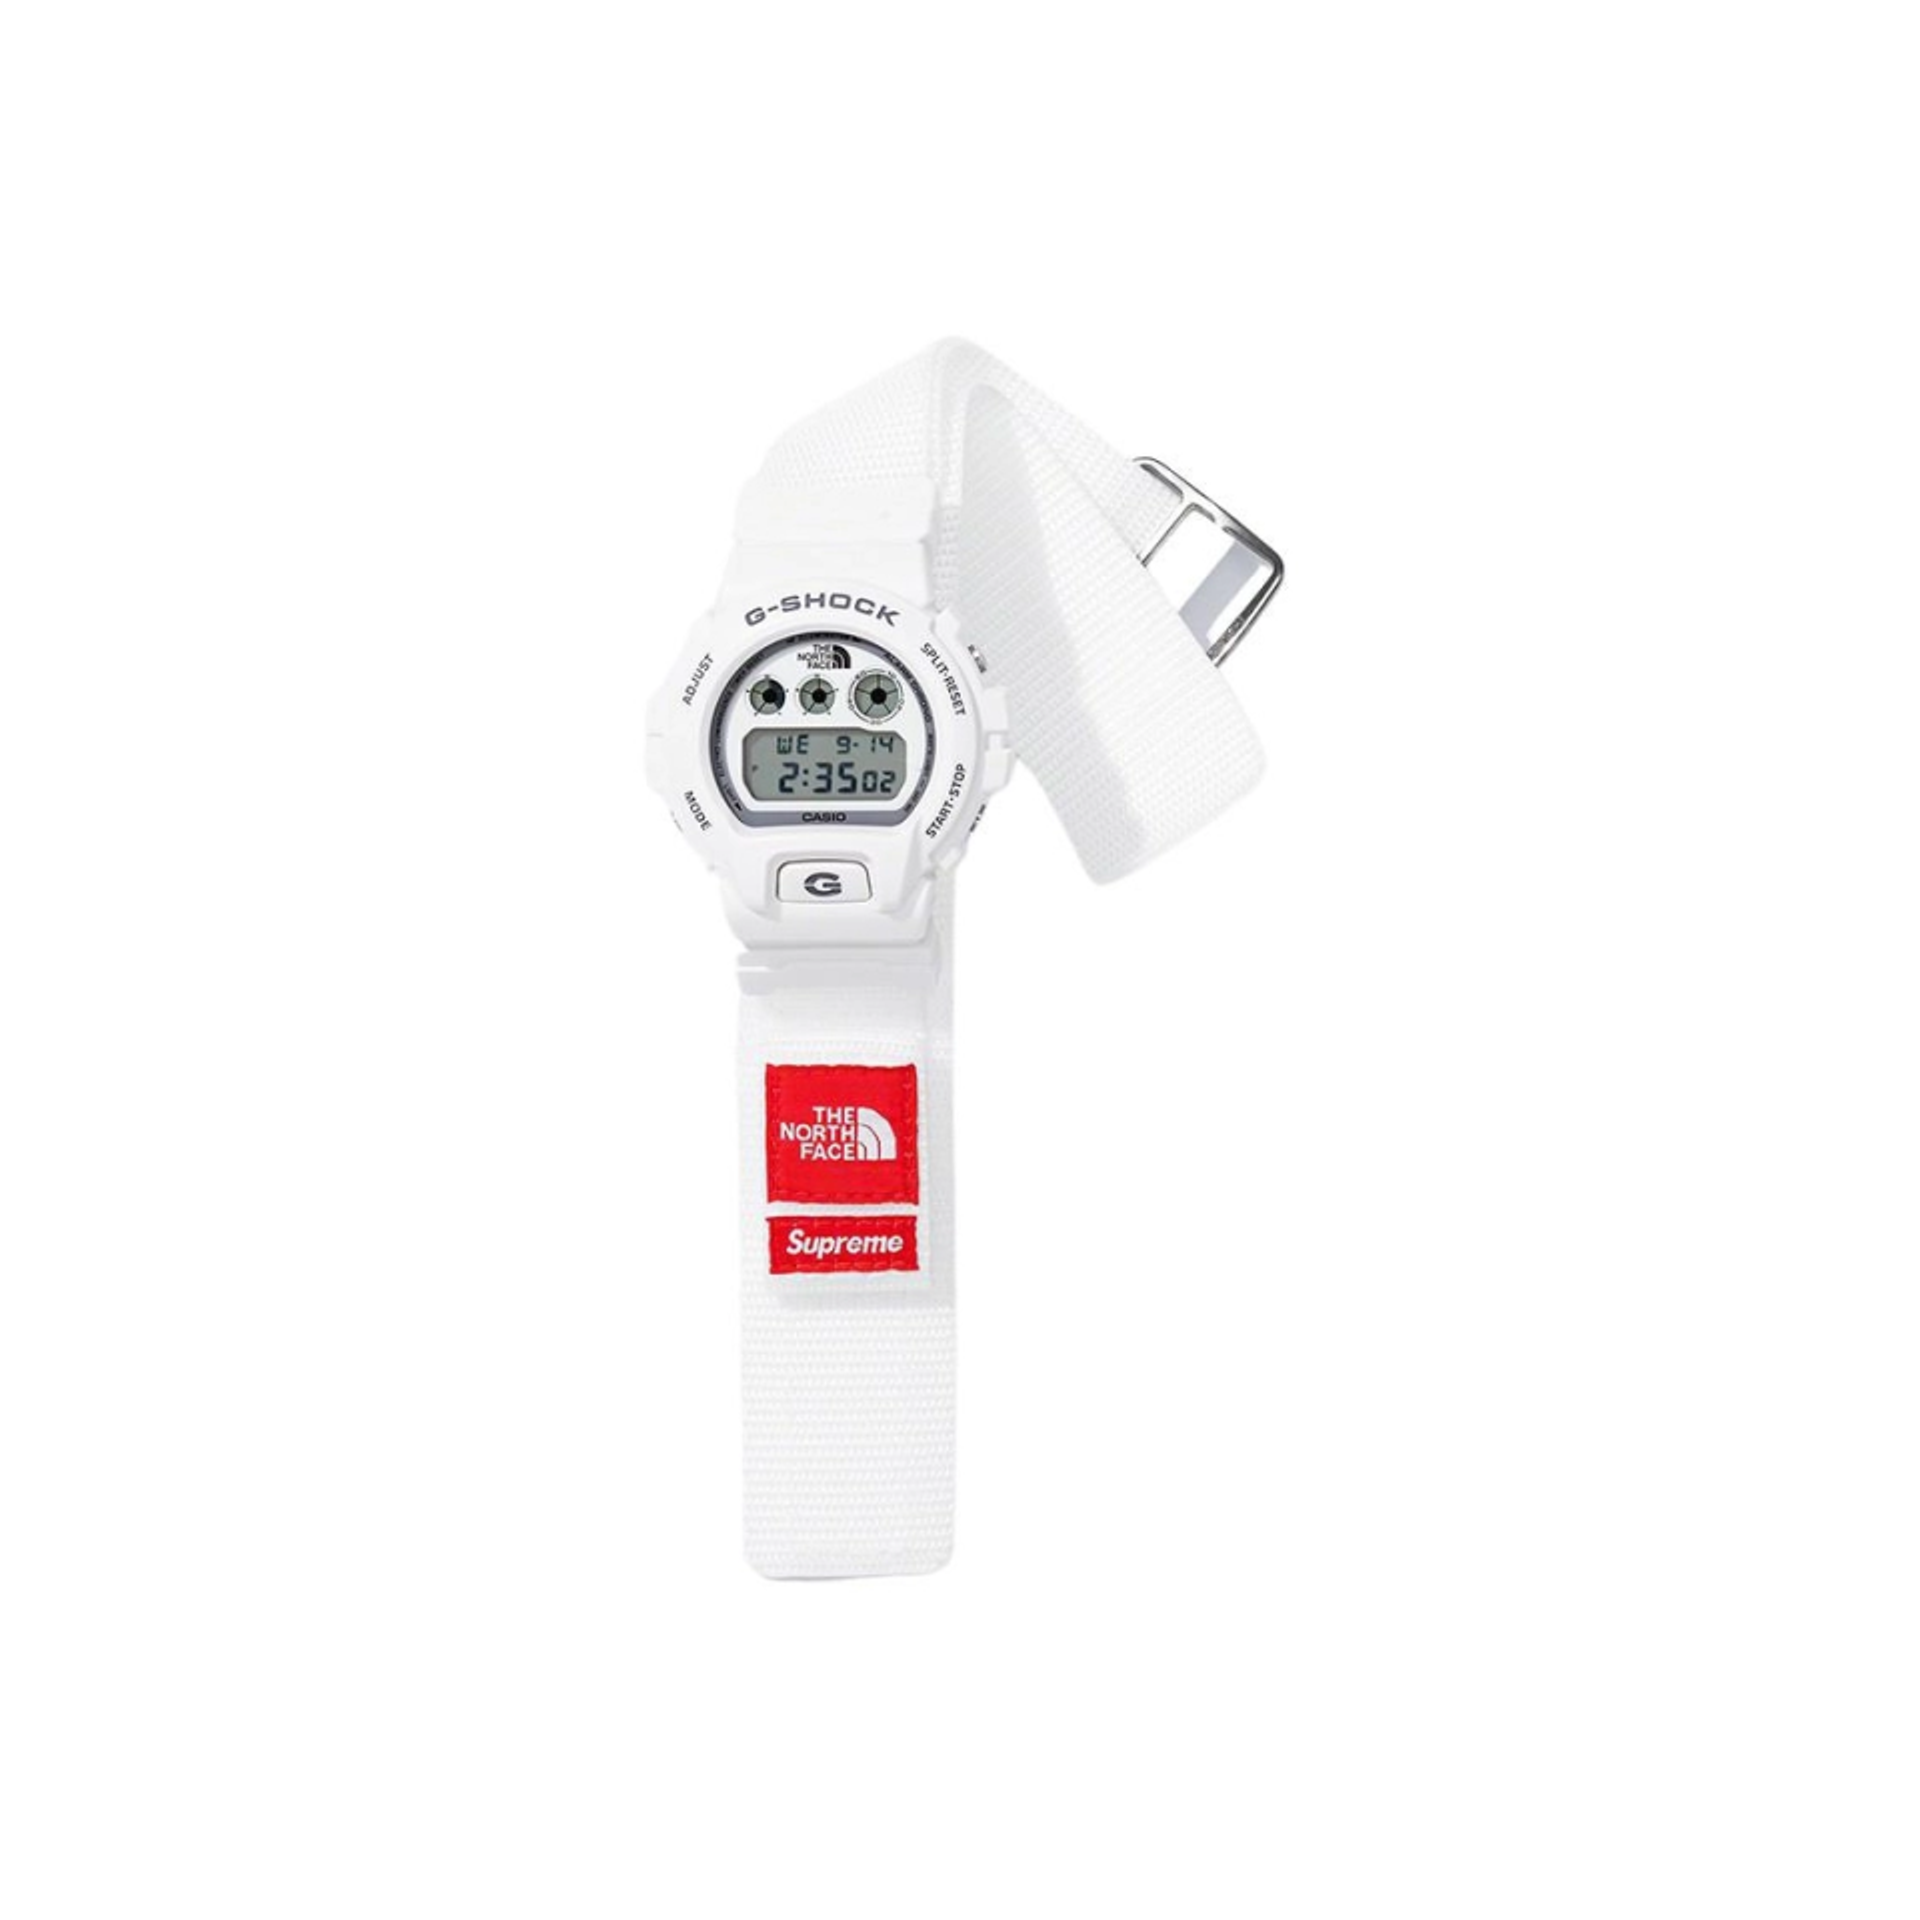 Supreme x The North Face x G-SHOCK Watch 'White' - FW22A4 WHITE | Ox Street